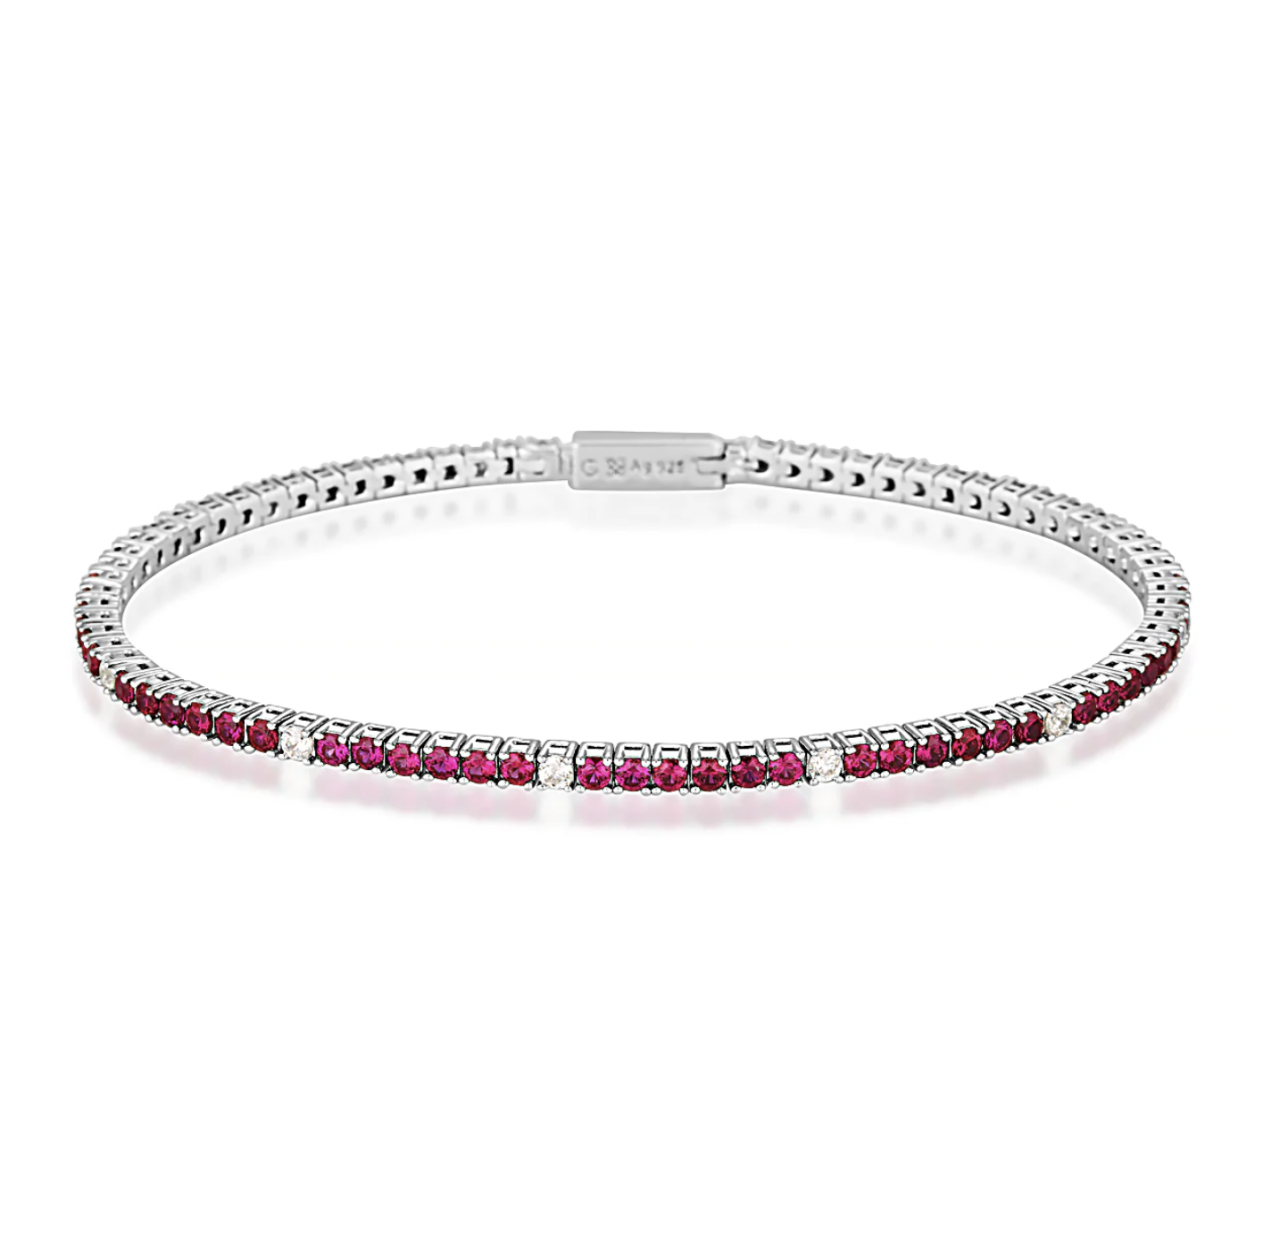 Georgini Milestone Created Ruby and White Cubic Zirconia 2mm Sterling Silver Tennis Bracelet